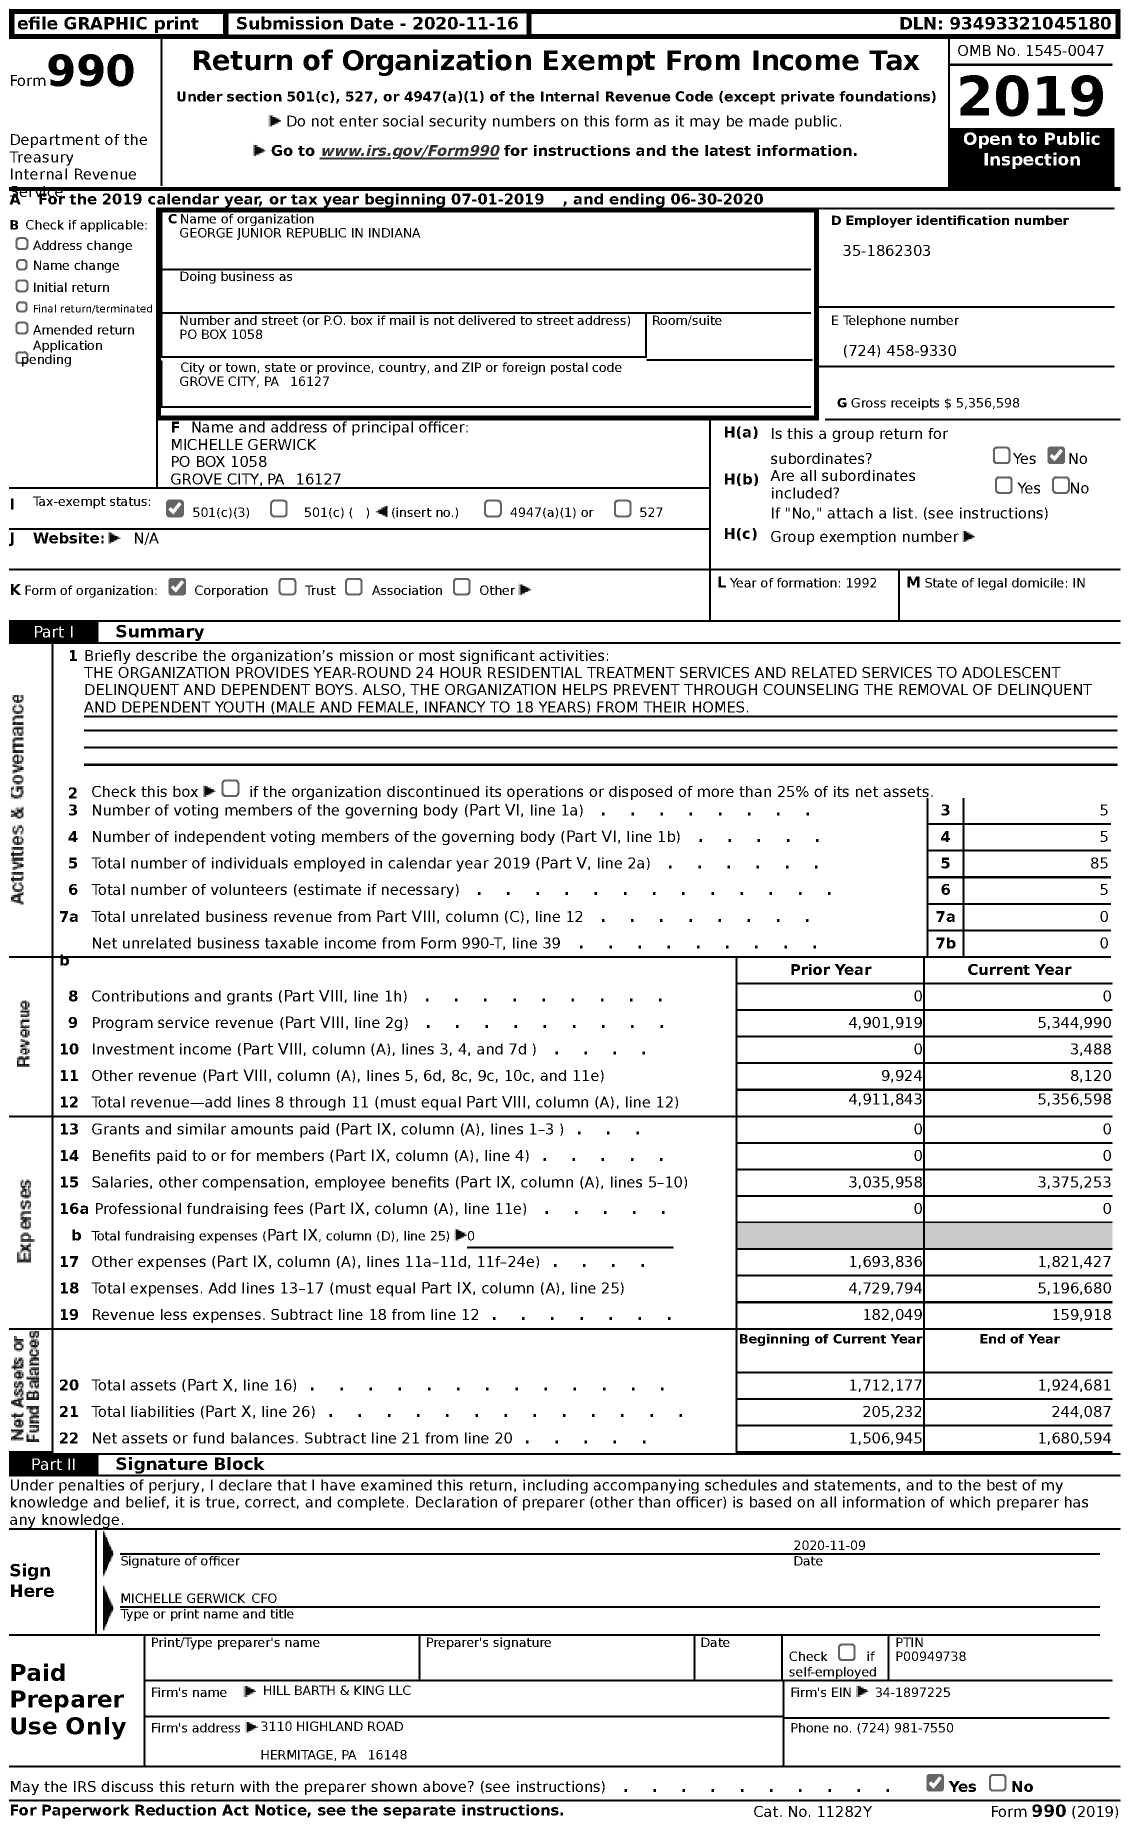 Image of first page of 2019 Form 990 for George Junior Republic in Indiana (GJR)